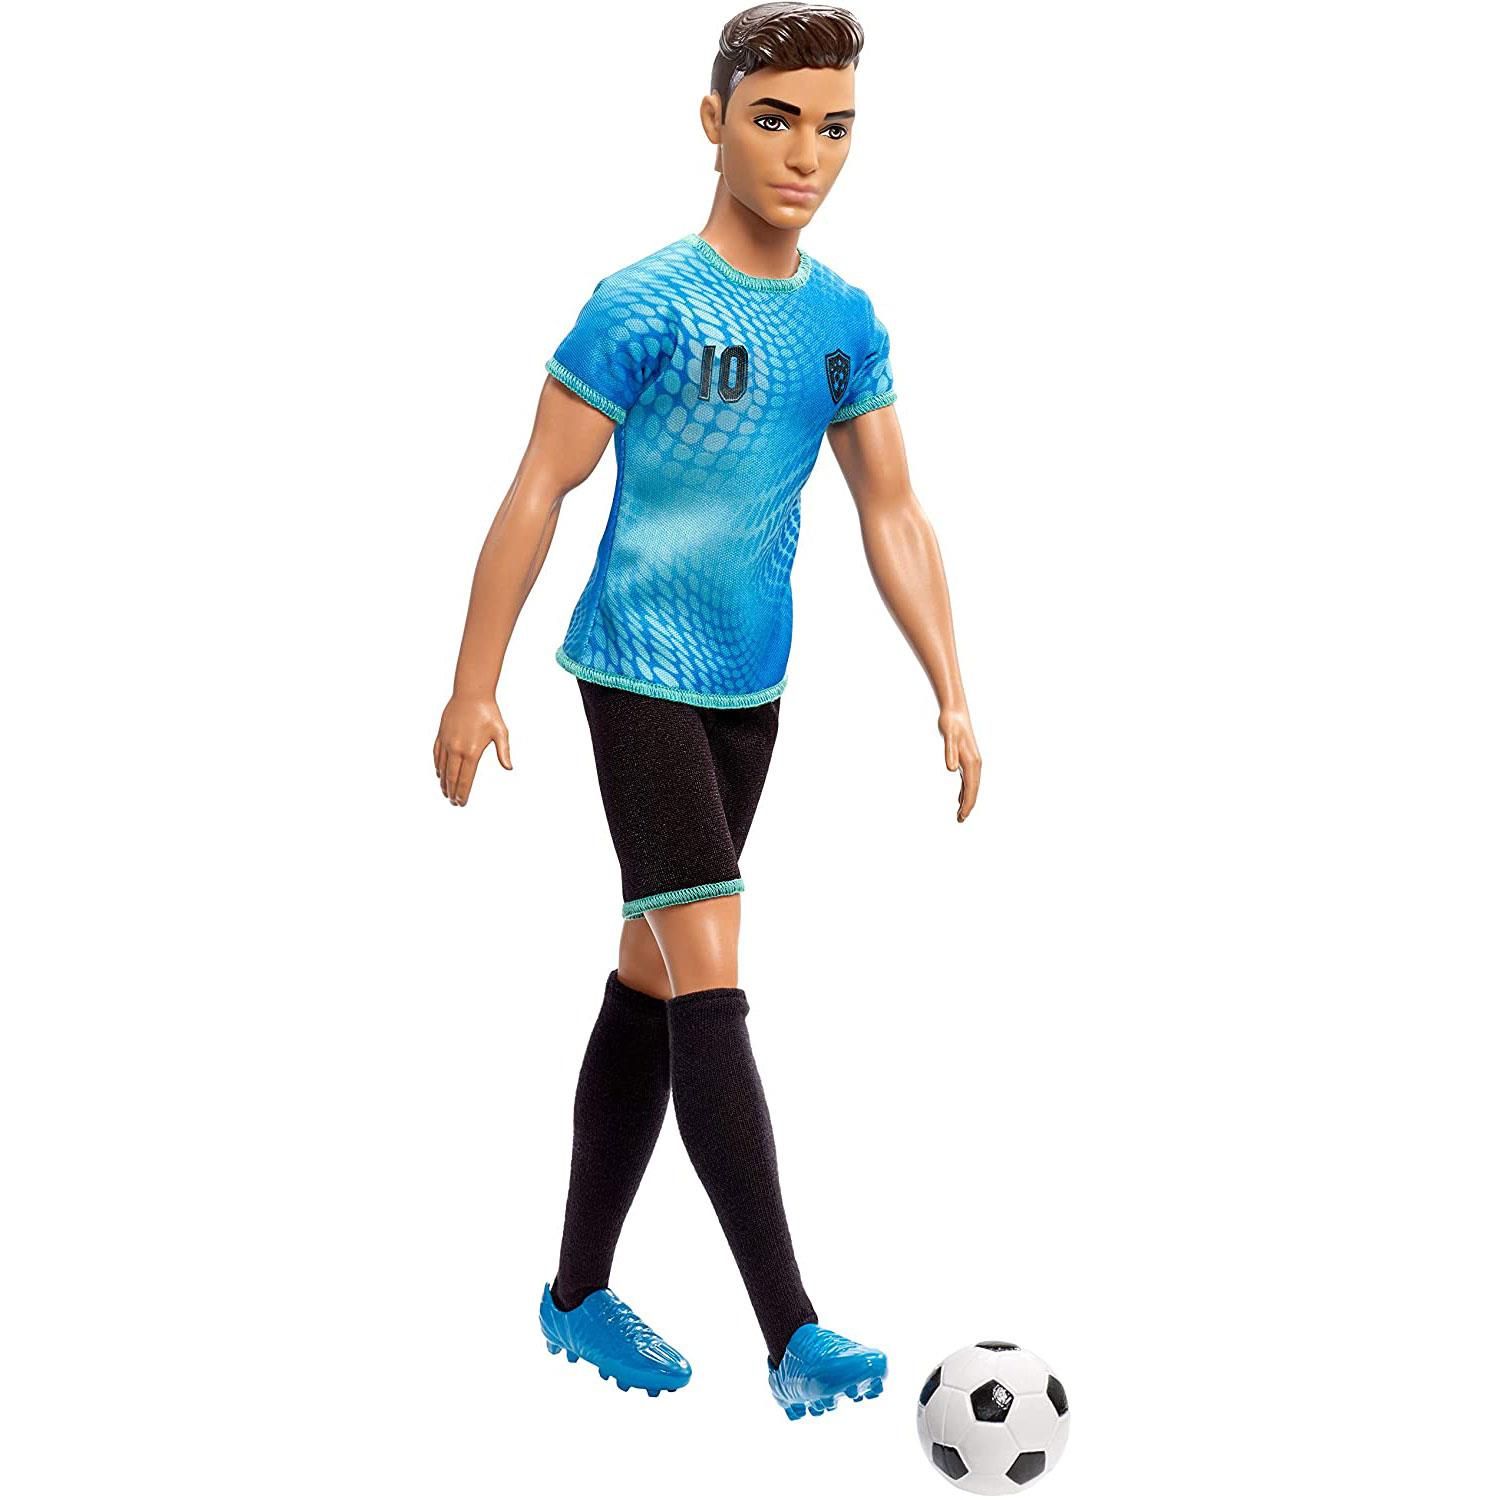 Barbie Durable & Good Quality Ken Careers Footballer Doll

Barbie and Ken career dolls inspire kids to dream big and aim high! Ken doll can go for his goals wearing a career-themed outfit along with accessories to play out professional moments. There are so many careers to explore. Each wears an outfit for a day on the job that stands out with realistic elements and signature touches. And each comes with workday accessories that spark imaginations and role-play action. Different skin tones and eye colours provide endless storytelling possibilities and create aspirational fun. Explore and collect all the Barbie dolls and toys because when a girl plays with Barbie, she imagines everything she can become (each sold separately, subject to availability). Includes Ken doll wearing fashions and accessories, plus career-themed pieces. Dolls cannot stand alone. Colours and decorations may vary.

Dream big with Barbie and Ken career dolls

Ken soccer player doll is dressed to score the winning goal, a blue top with a graphic print and team number, black shorts, black soccer socks, and blue sneakers

A soccer ball earns playtime points inspiring imagination and role-plays fun

Ken soccer player doll makes a perfect gift for young sports lovers, especially soccer players

Explore all the Barbie dolls and playsets because when a girl plays with Barbie, she imagines everything she can become (each sold separately, subject to availability)

Box contains:

1x Ken Soccer Doll
1x Soccer Ball 
1x soccer socks 